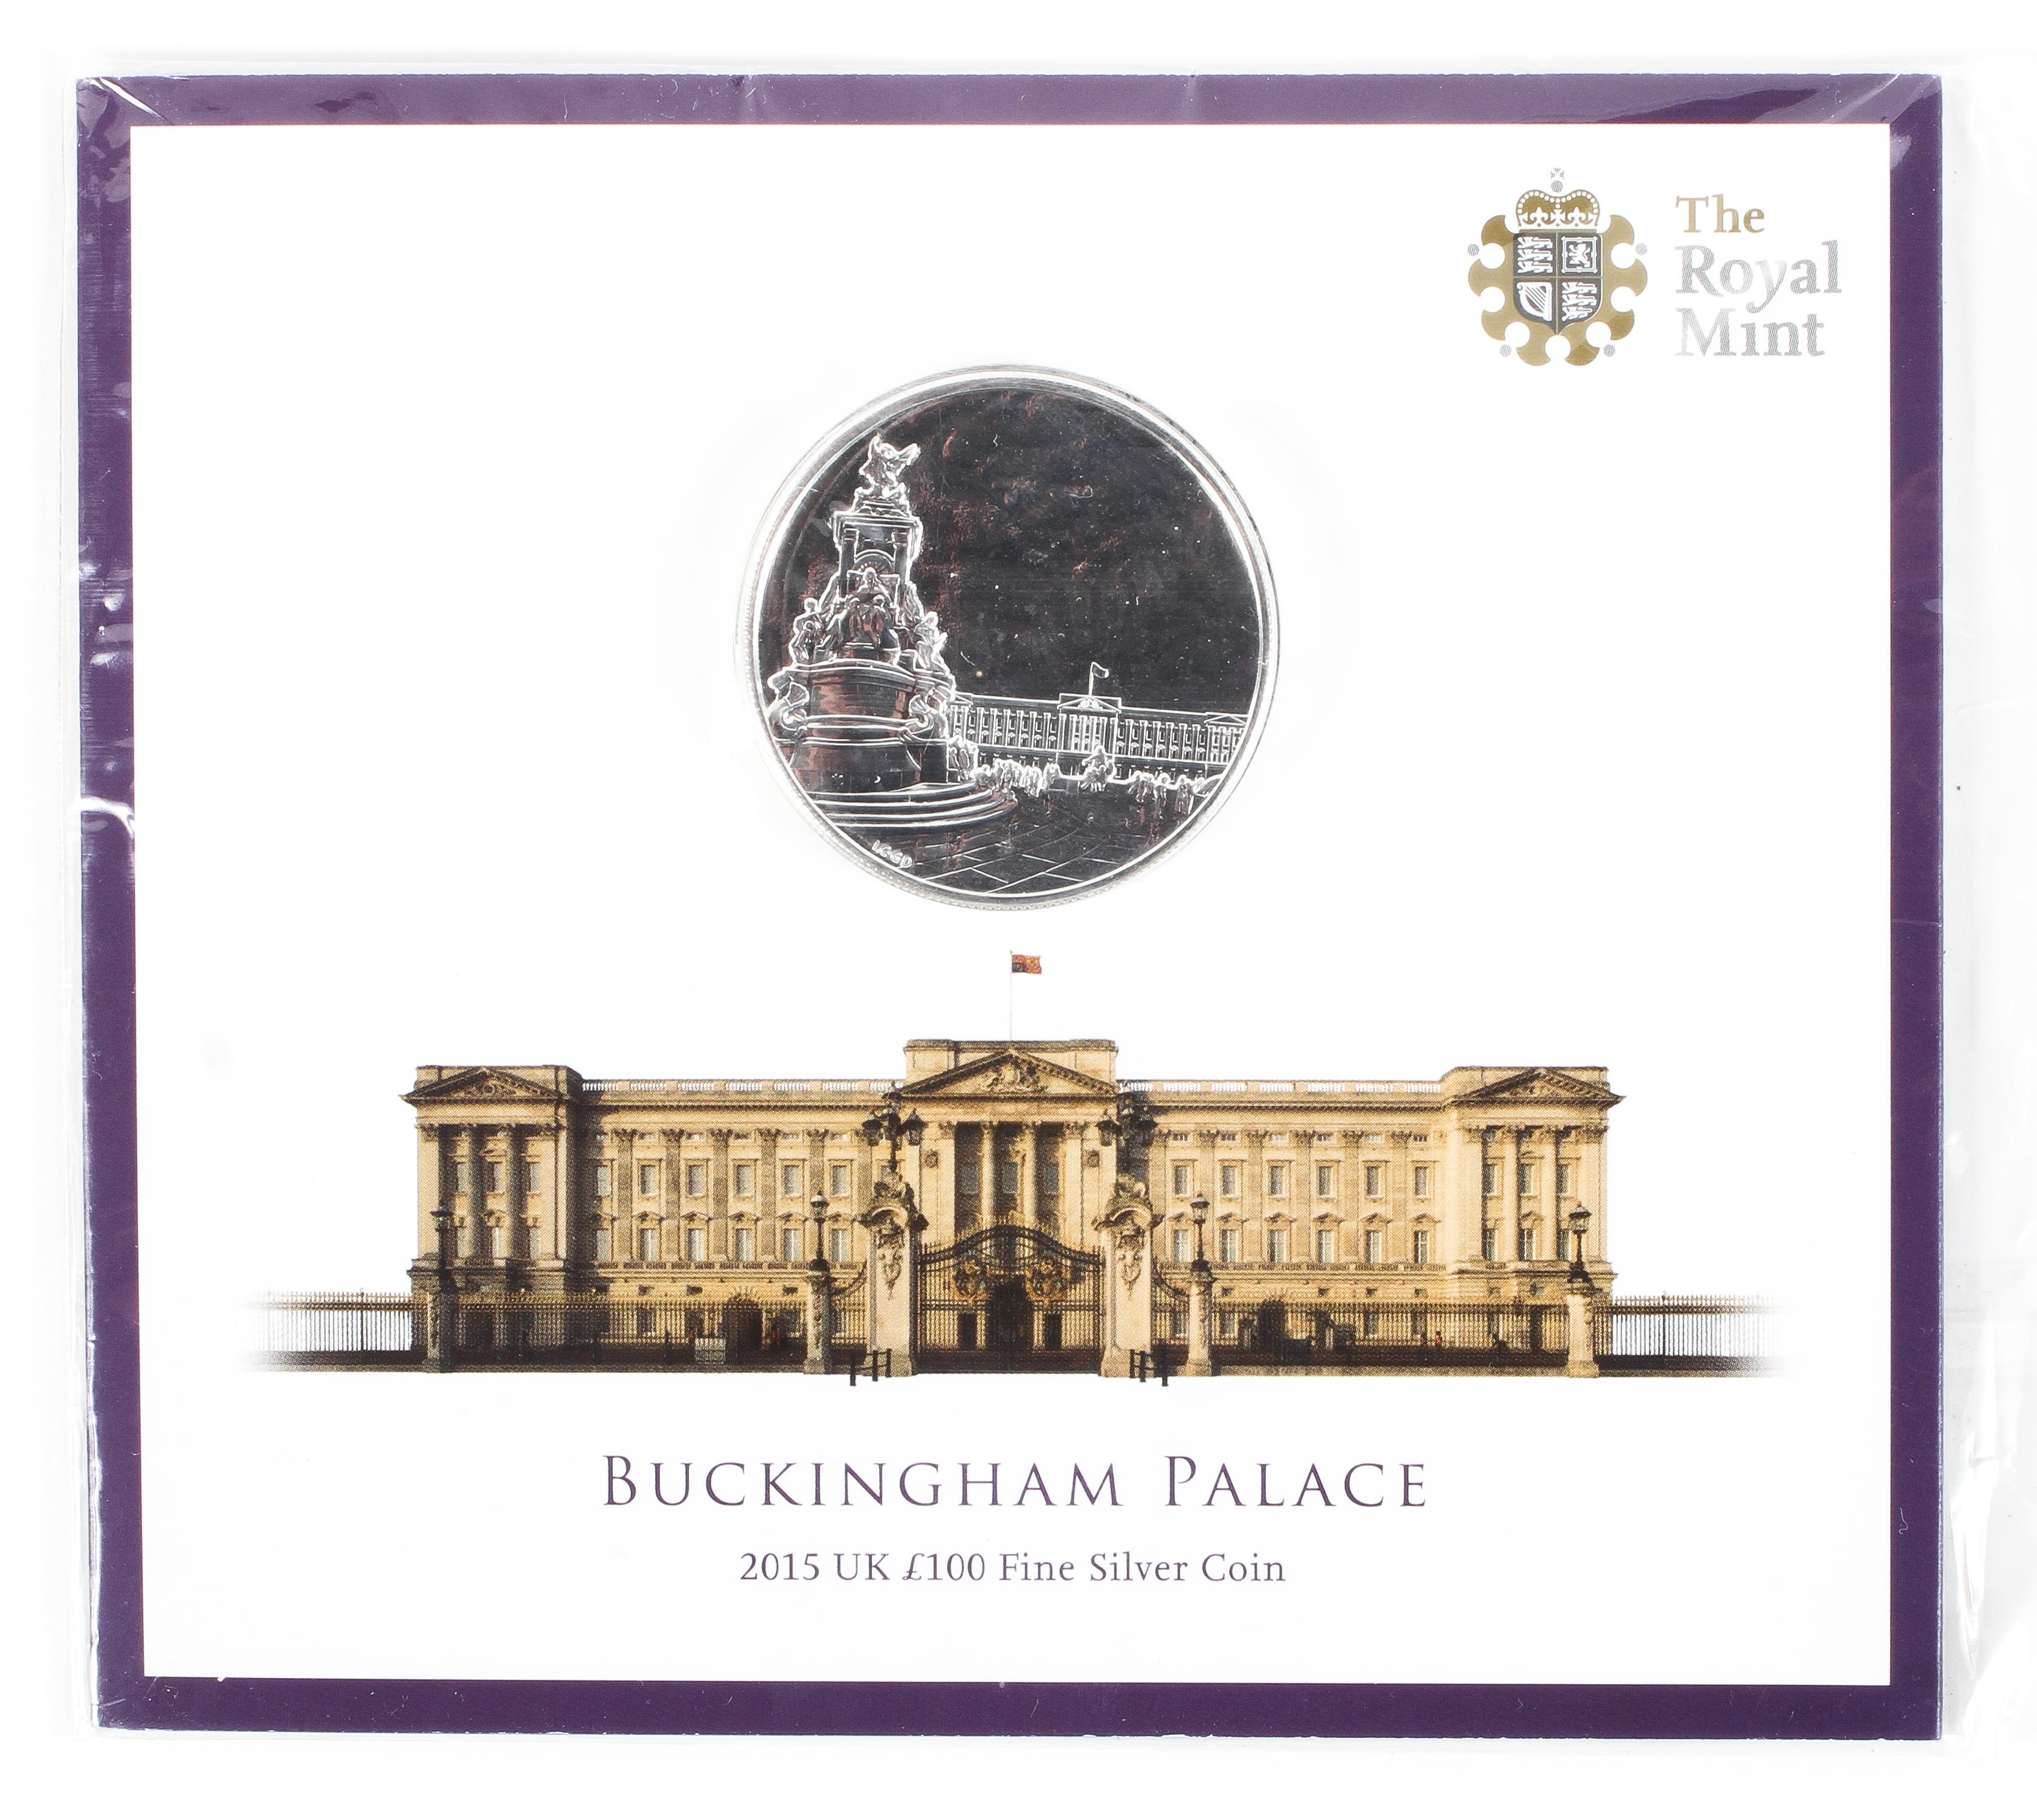 A 2015 UK £100 fine silver coin. Commemorating Buckingham Palace, 999 grade silver. Weight 62.